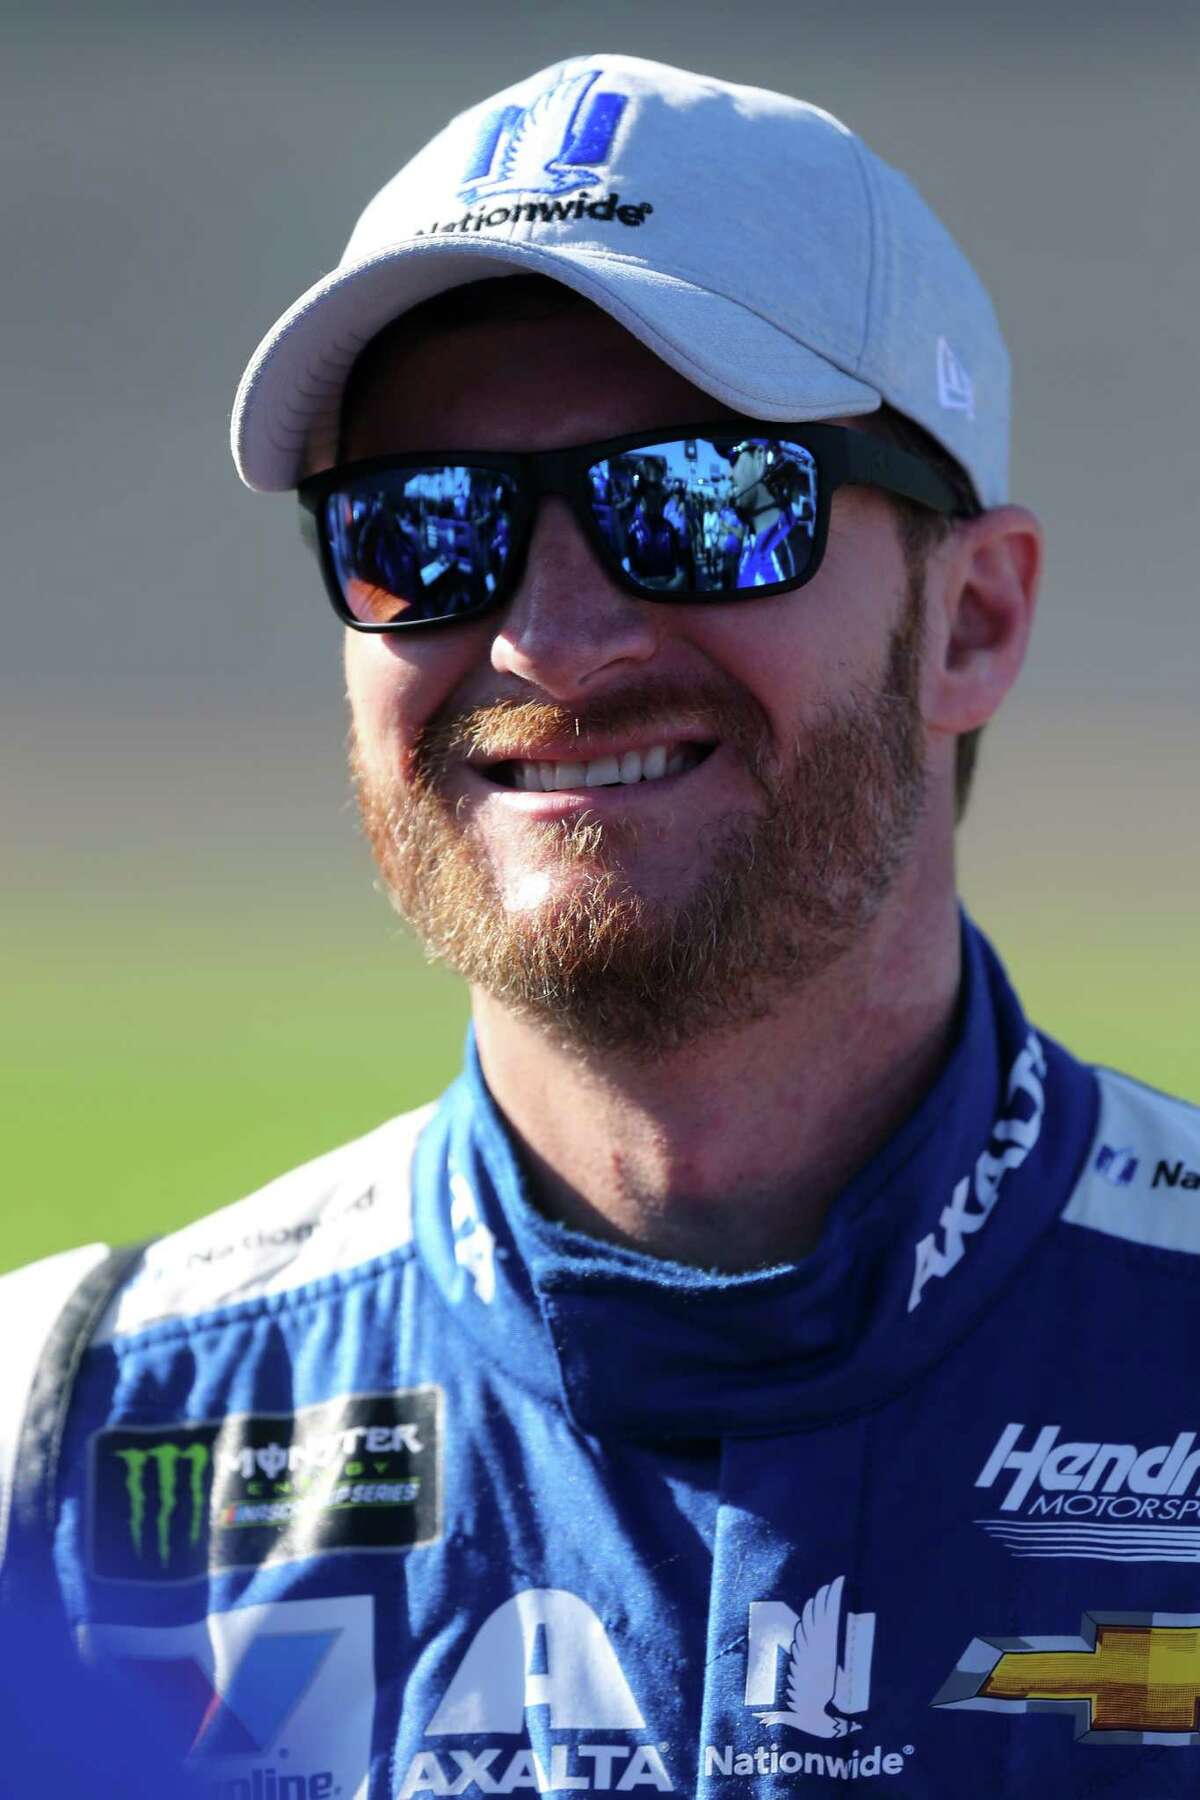 DAYTONA BEACH, FL - FEBRUARY 19: Dale Earnhardt Jr., driver of the #88 Nationwide Chevrolet, stands on the grid during qualifying for the Monster Energy NASCAR Cup Series 59th Annual DAYTONA 500 at Daytona International Speedway on February 19, 2017 in Daytona Beach, Florida. (Photo by Jerry Markland/Getty Images)